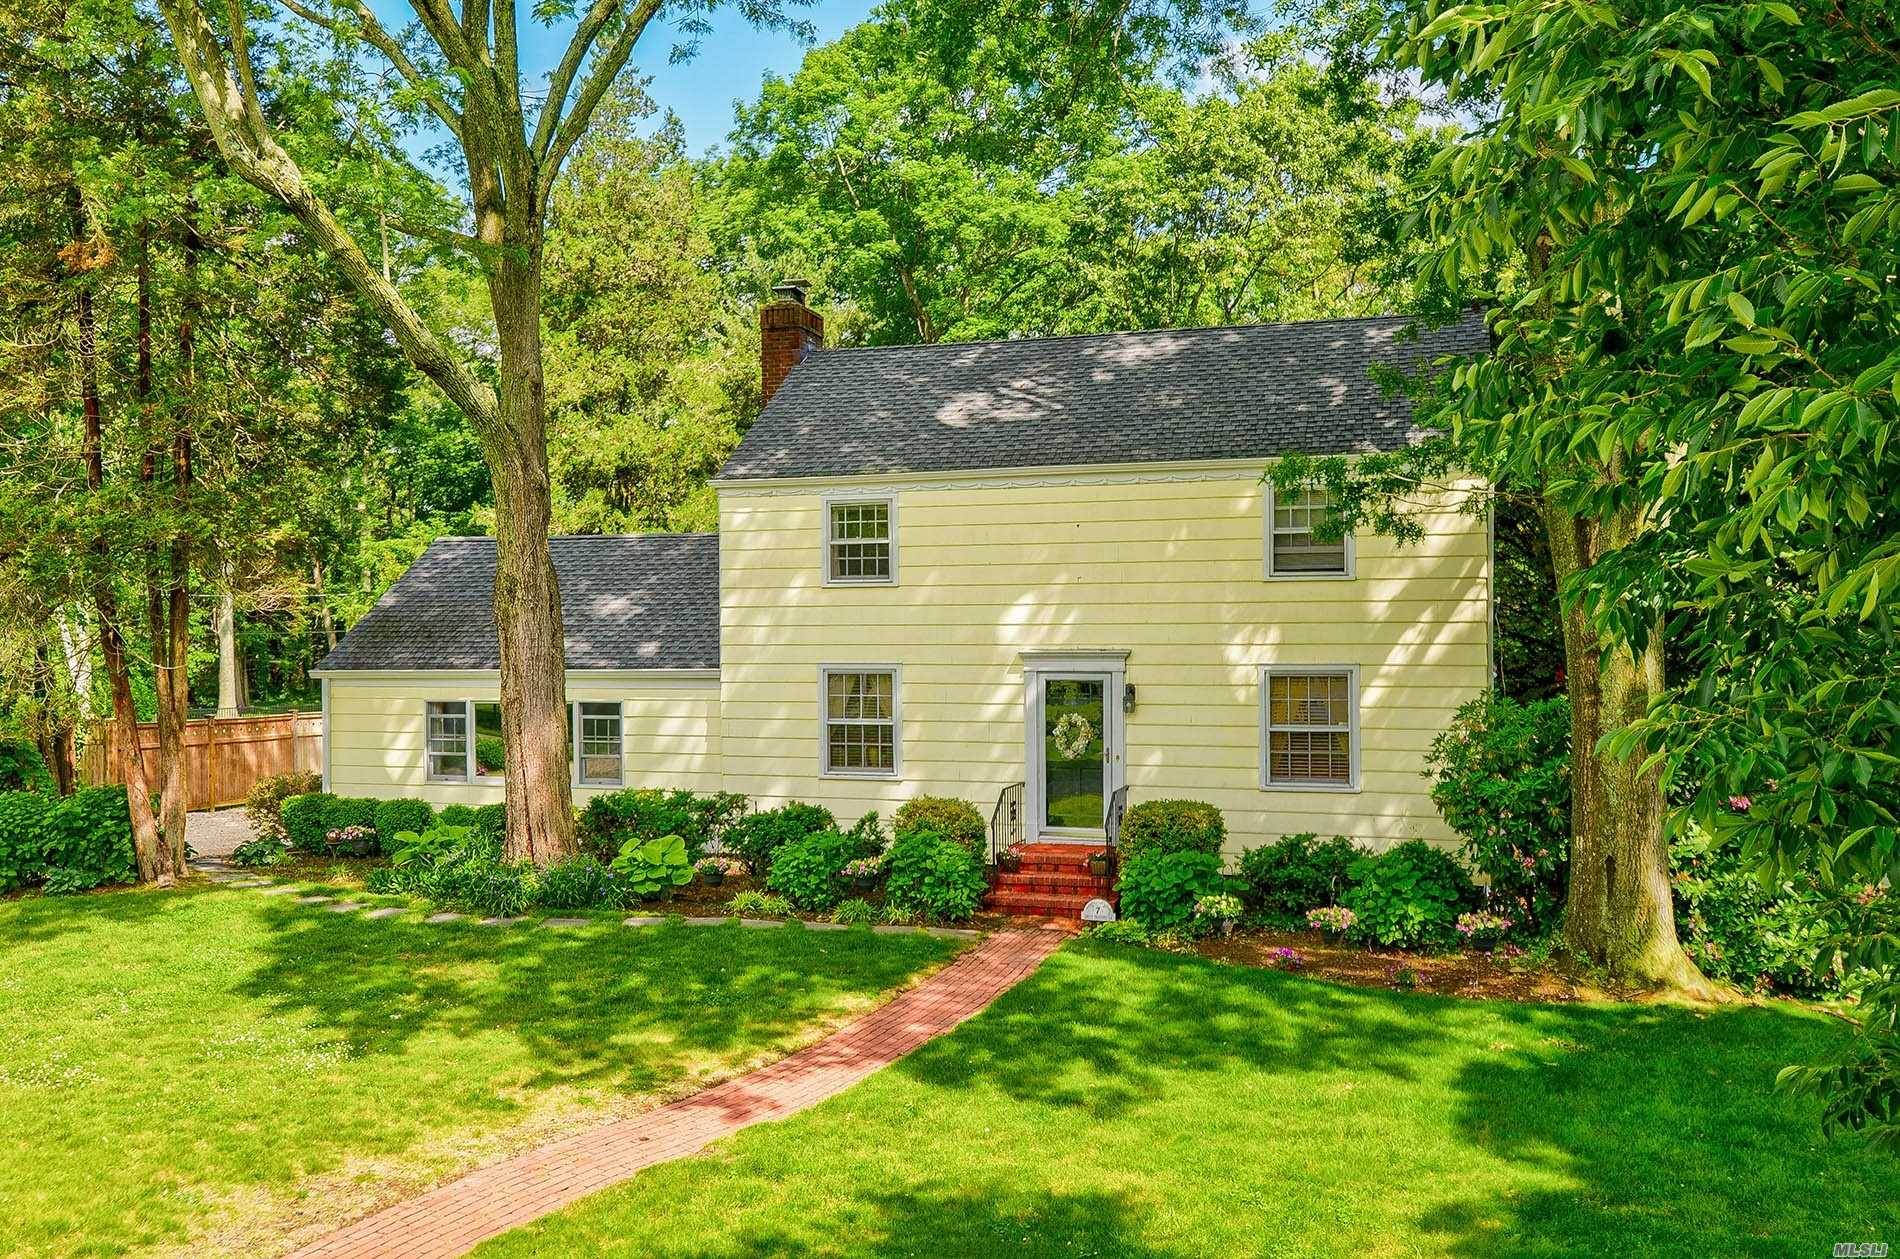 Beautiful classic center hall colonial sits on breathtaking property.